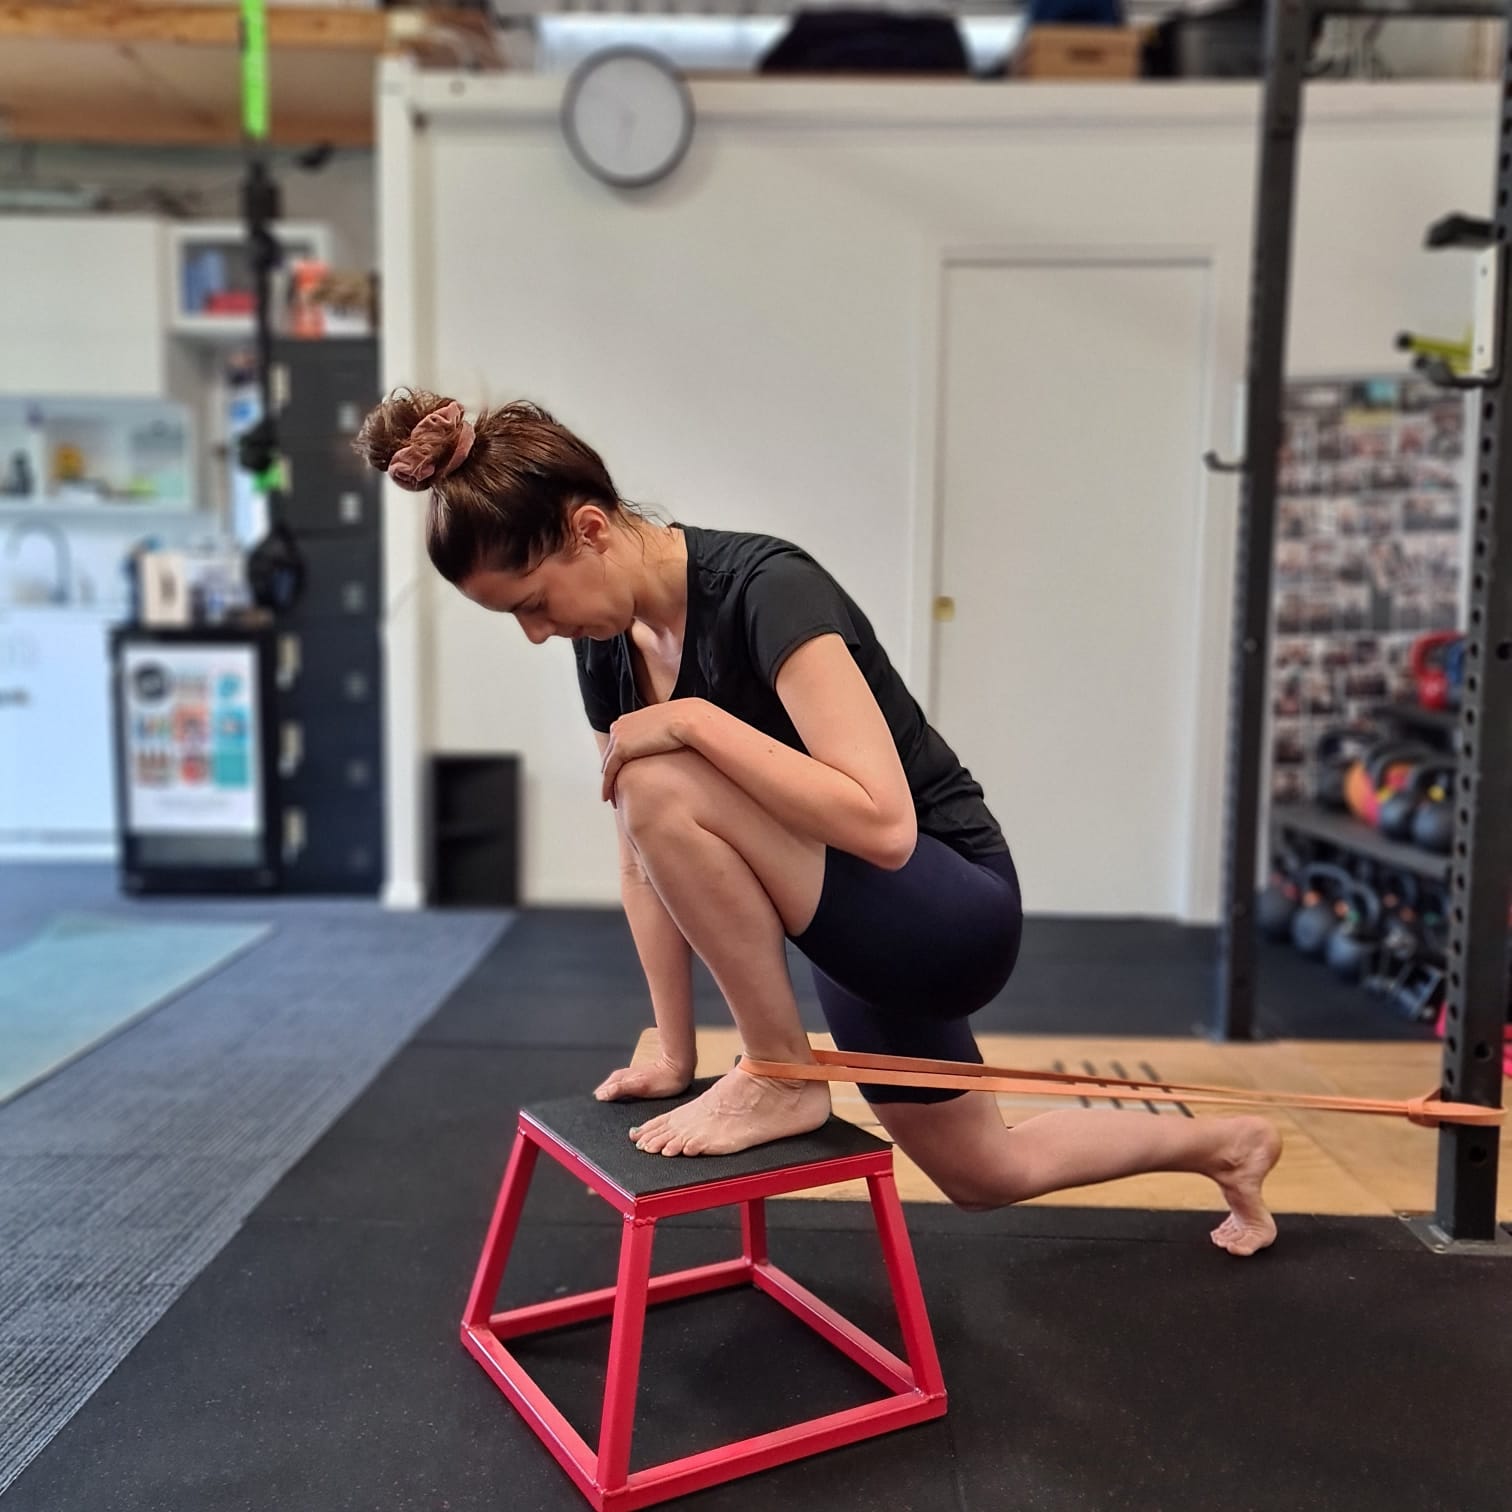 Personal training sessions with some stretch to get the ankles moving better, Hopscotch Fitness Burwood (03) 9808 6942